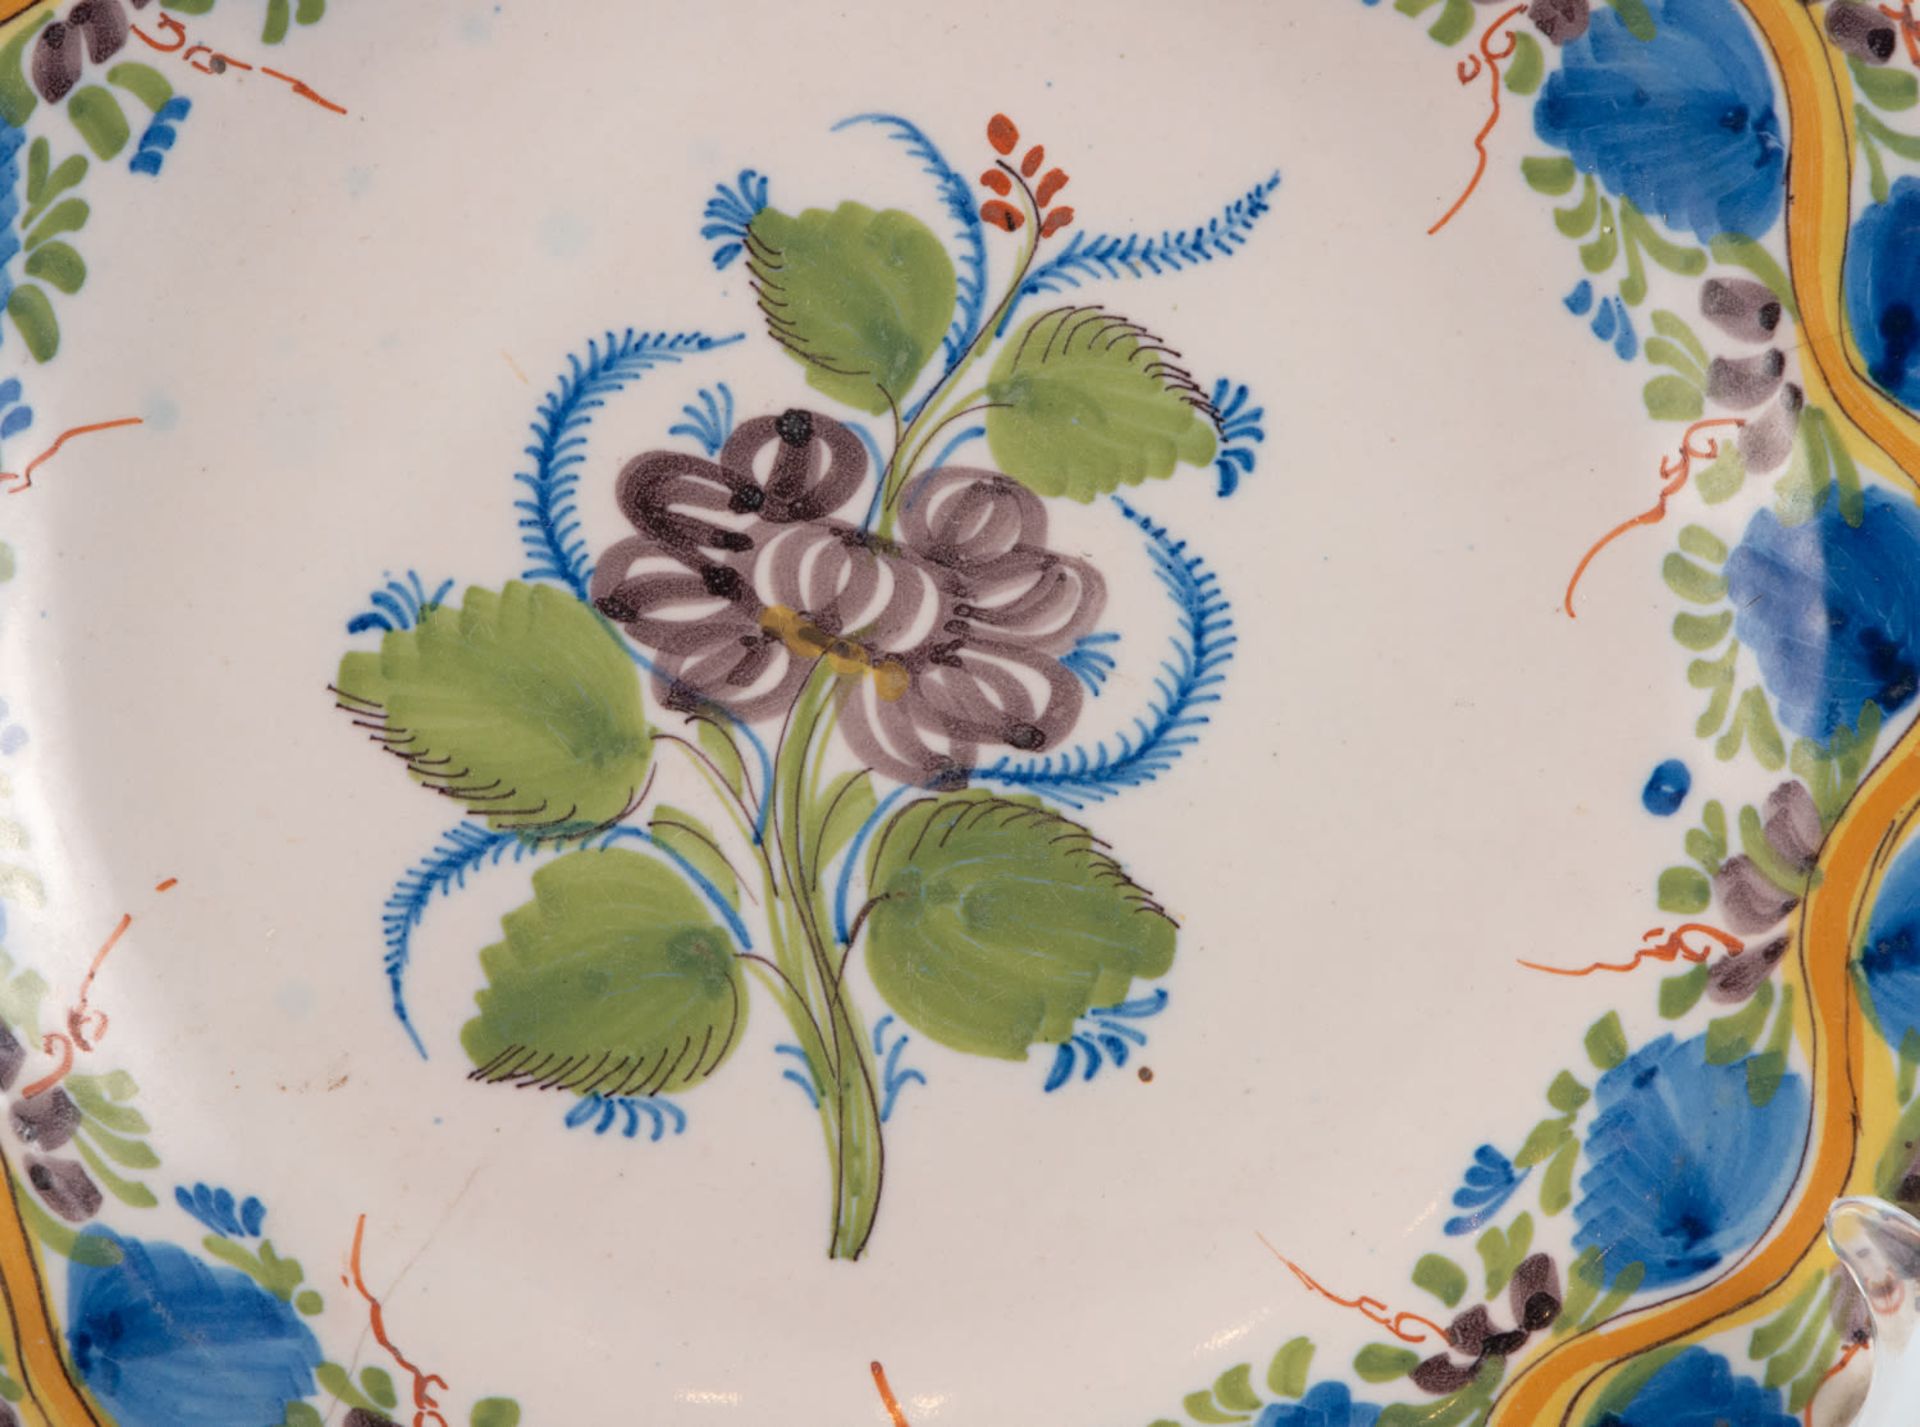 Ceramic plate from Manises, 20th century - Image 2 of 3